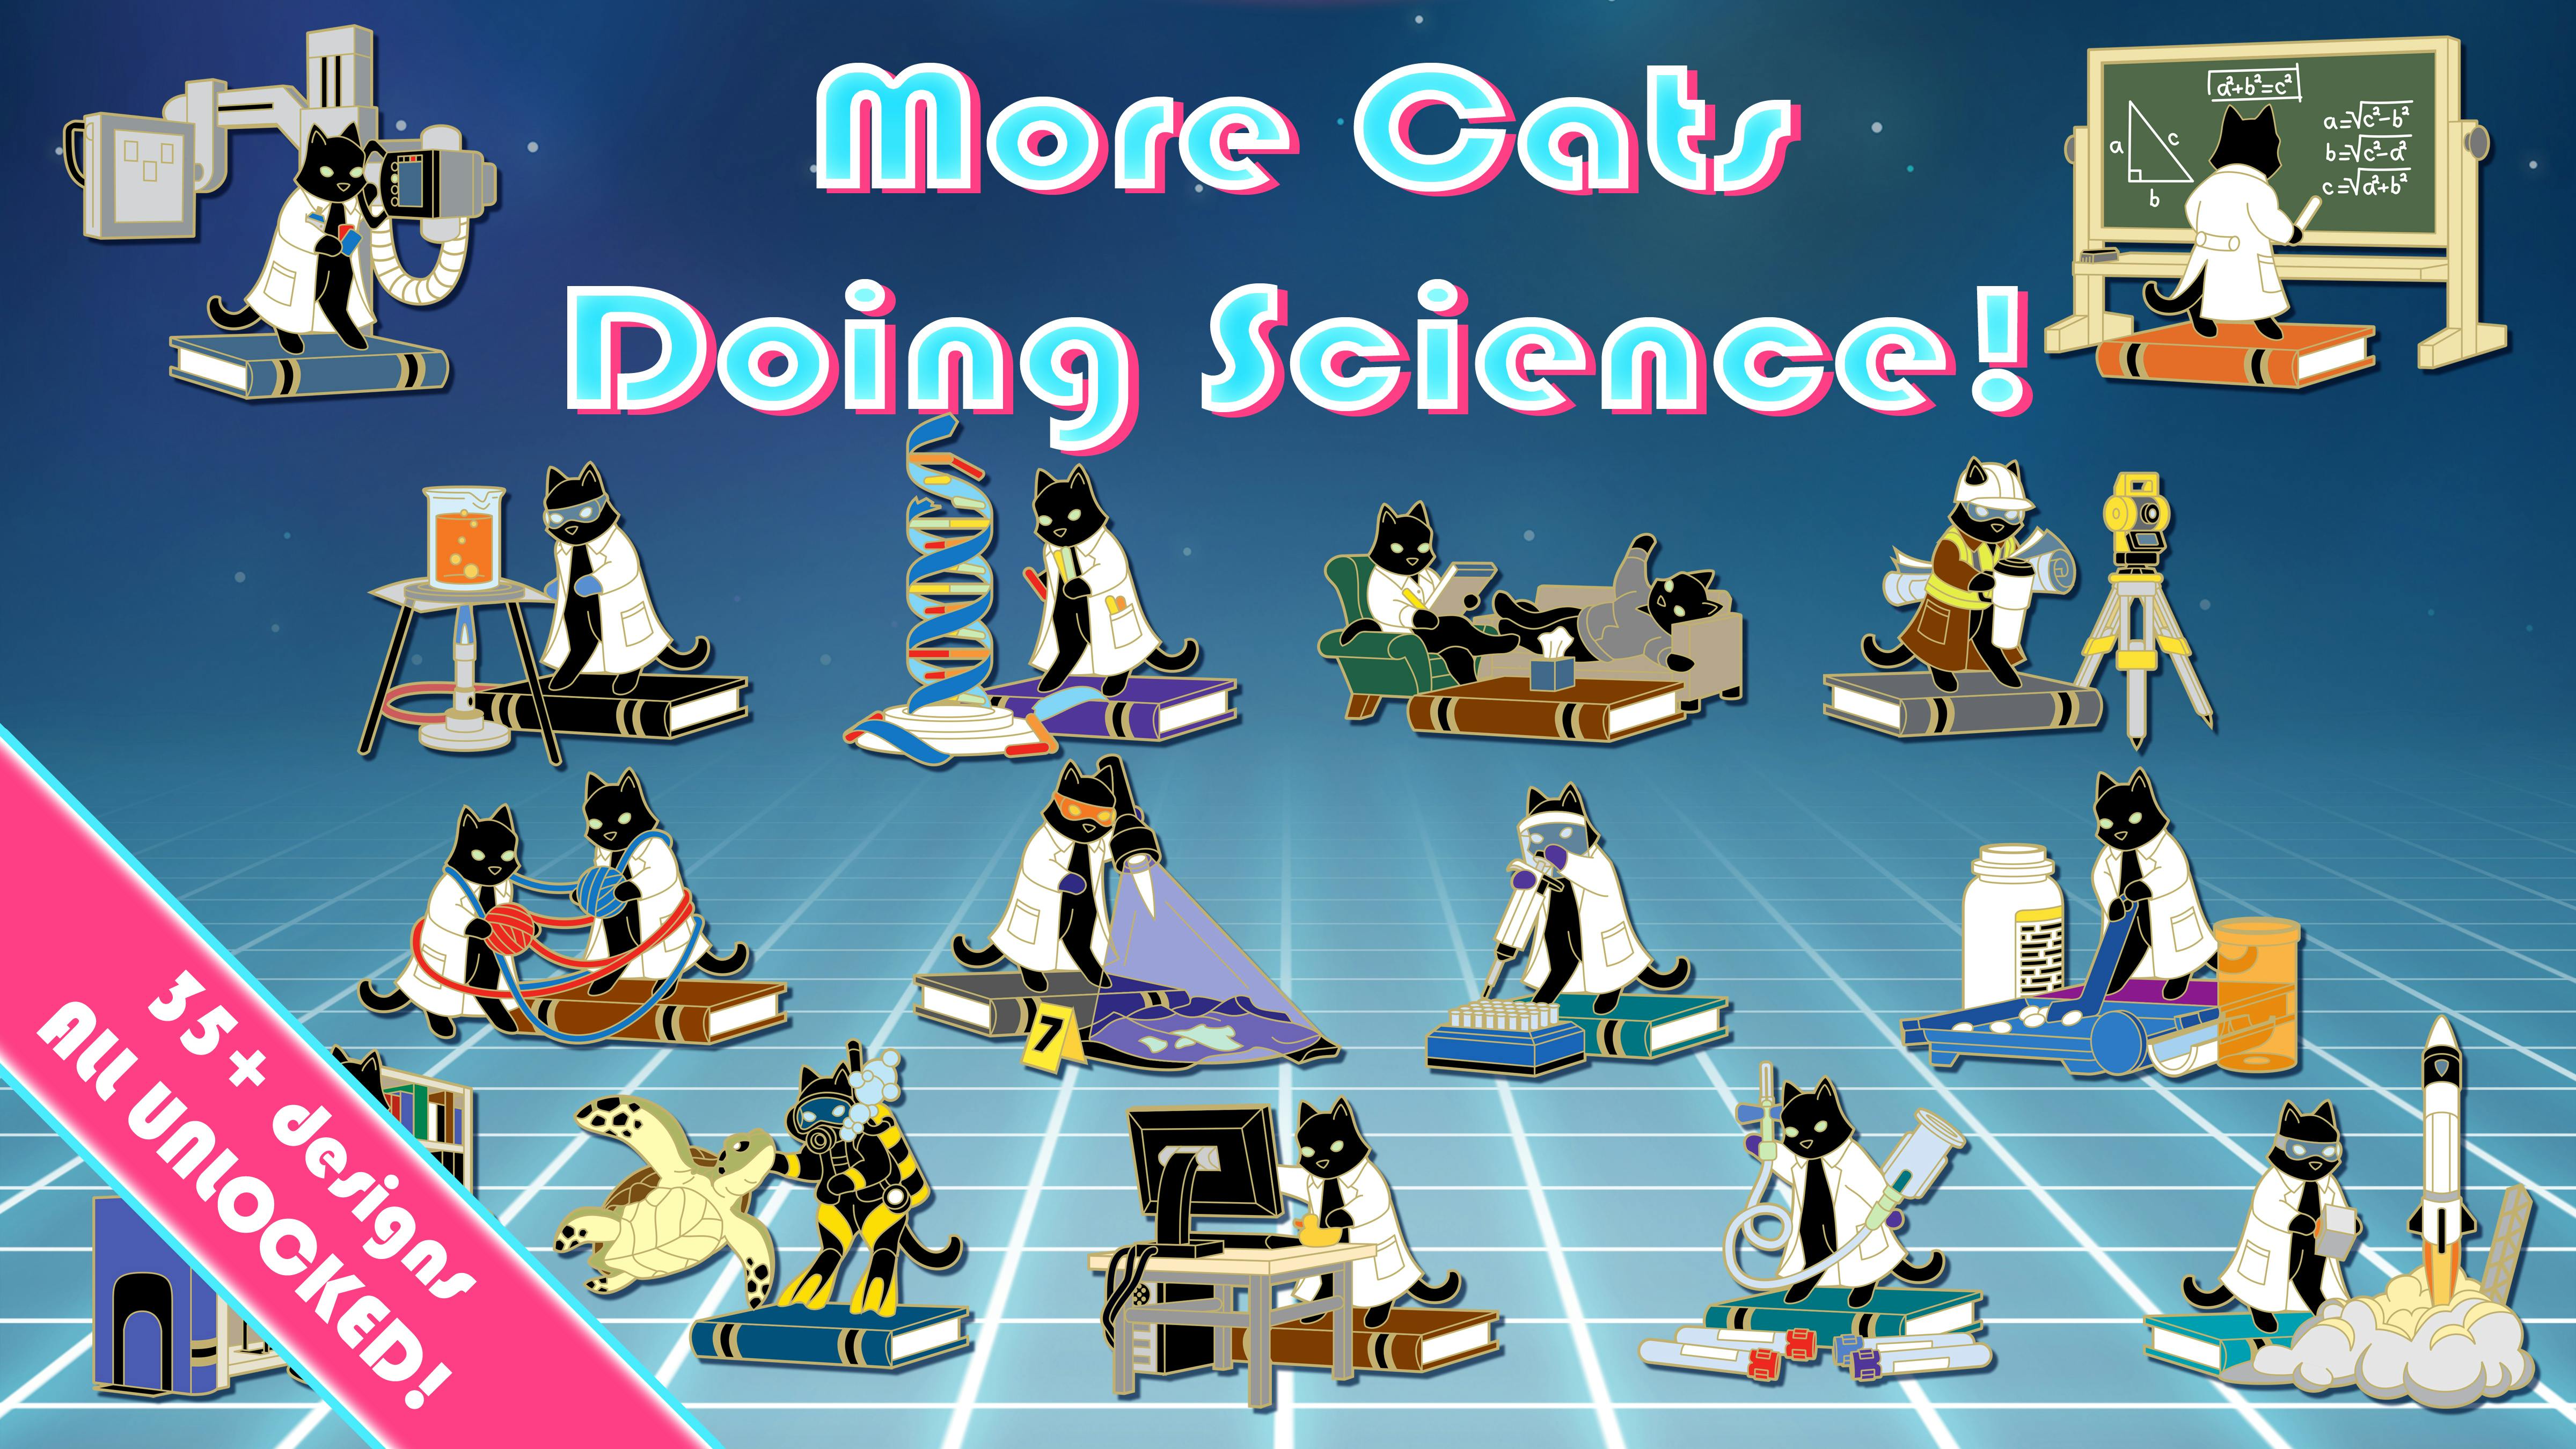 More Cats Doing Science! - Hard Enamel Pins